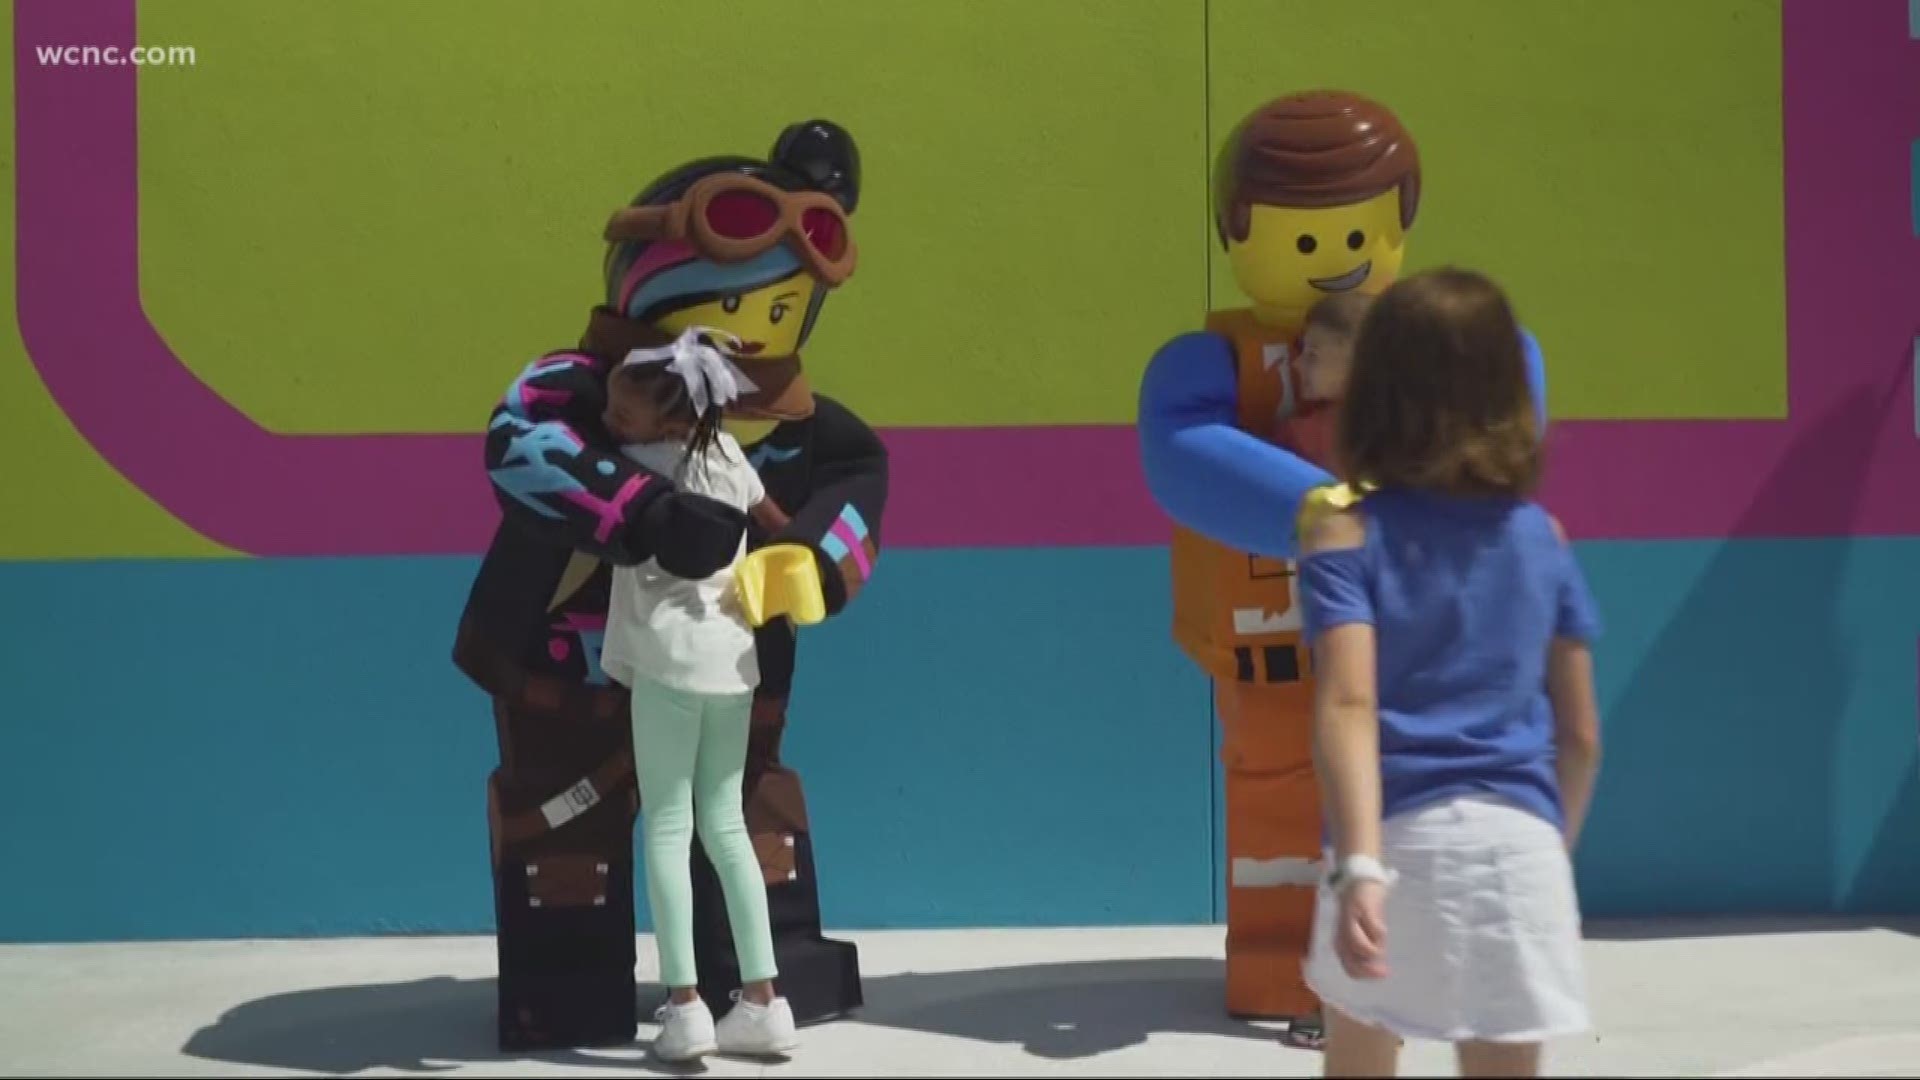 Legoland Florida Resort is the perfect vacation for the whole family. Plus there’s a special deal right now for North Carolina residents!